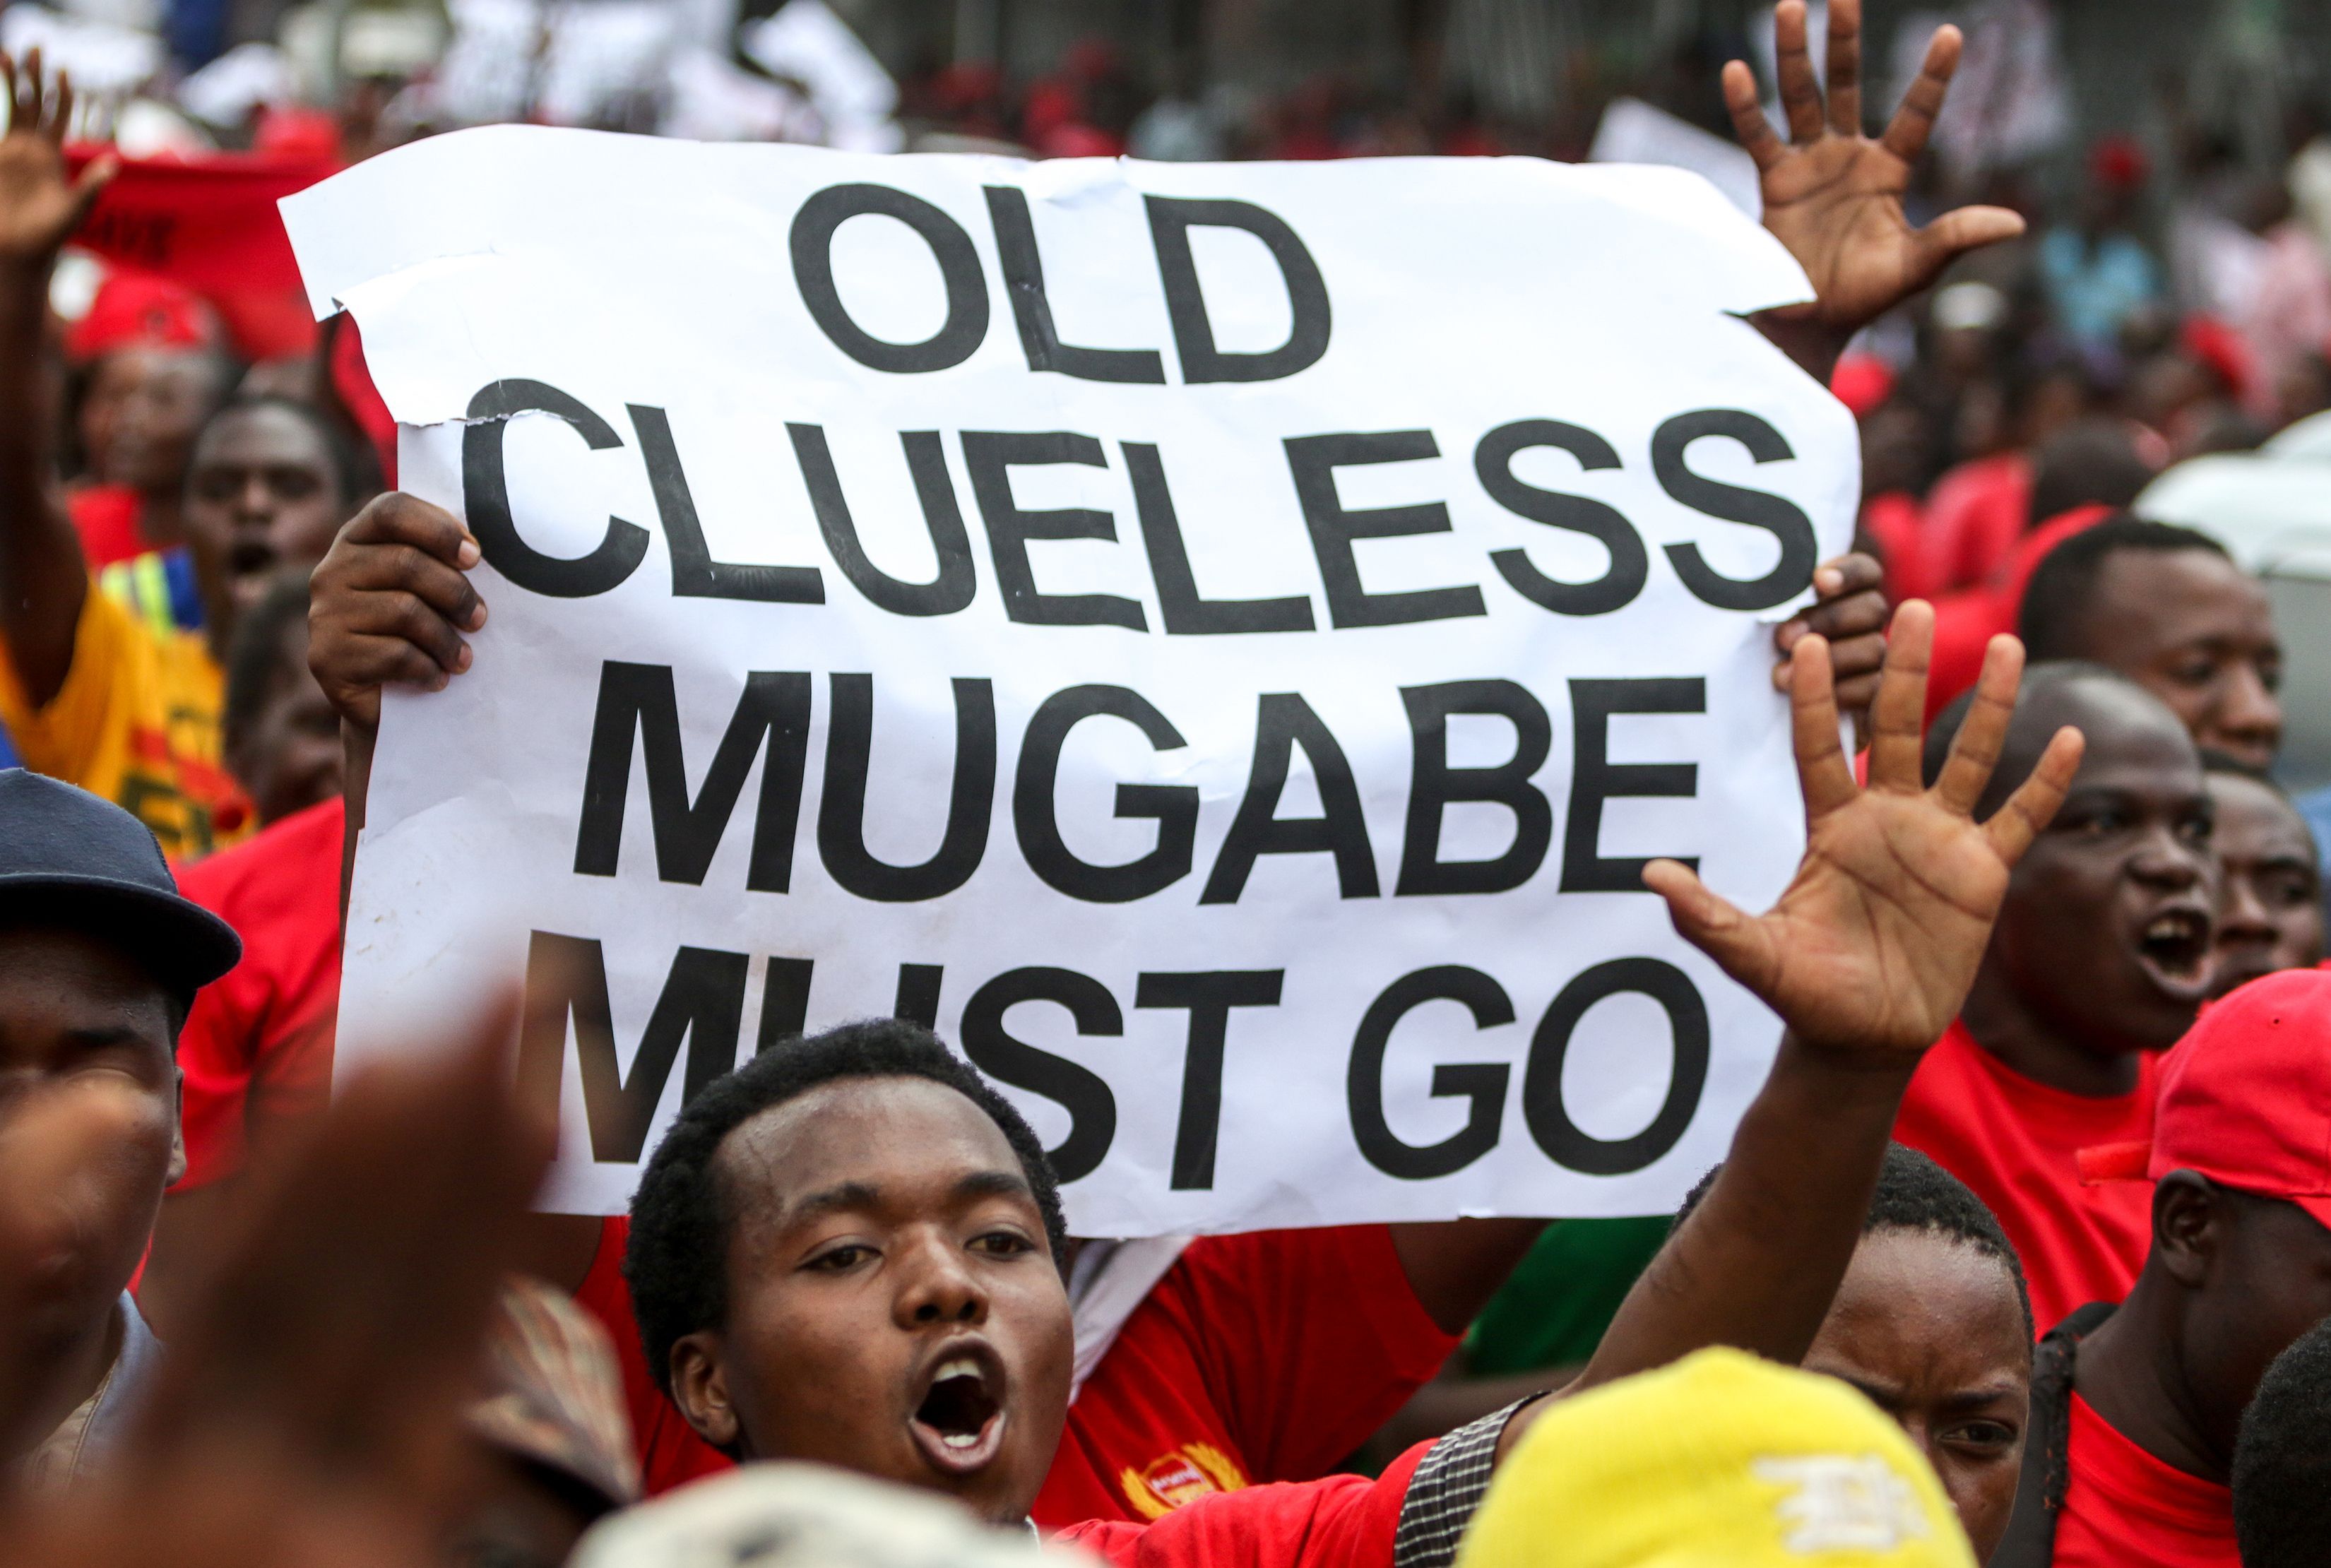 Movement for Democratic Change (MDC) youth supporters hold up a sign during a demonstration by the opposition party in Harare on April 14, 2016 (Jekesai Njikizana—AFP/Getty Images)